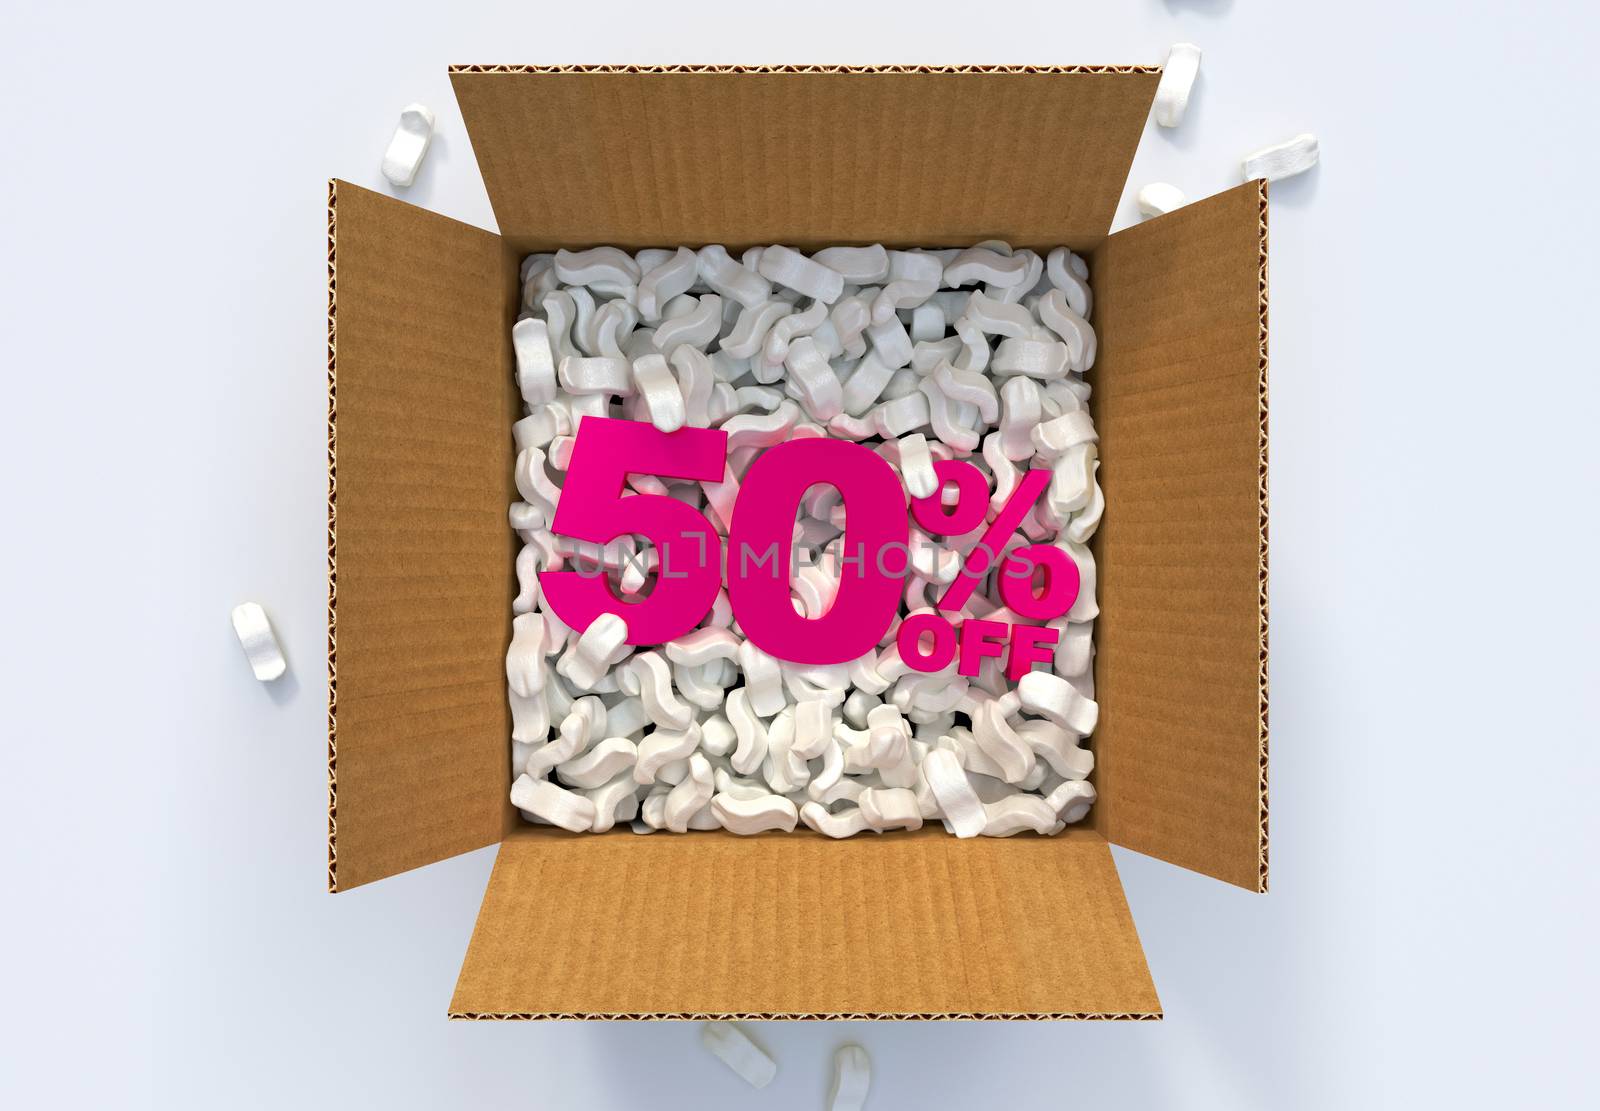 Box with shipping peanuts and 50 percent off sign by Barbraford